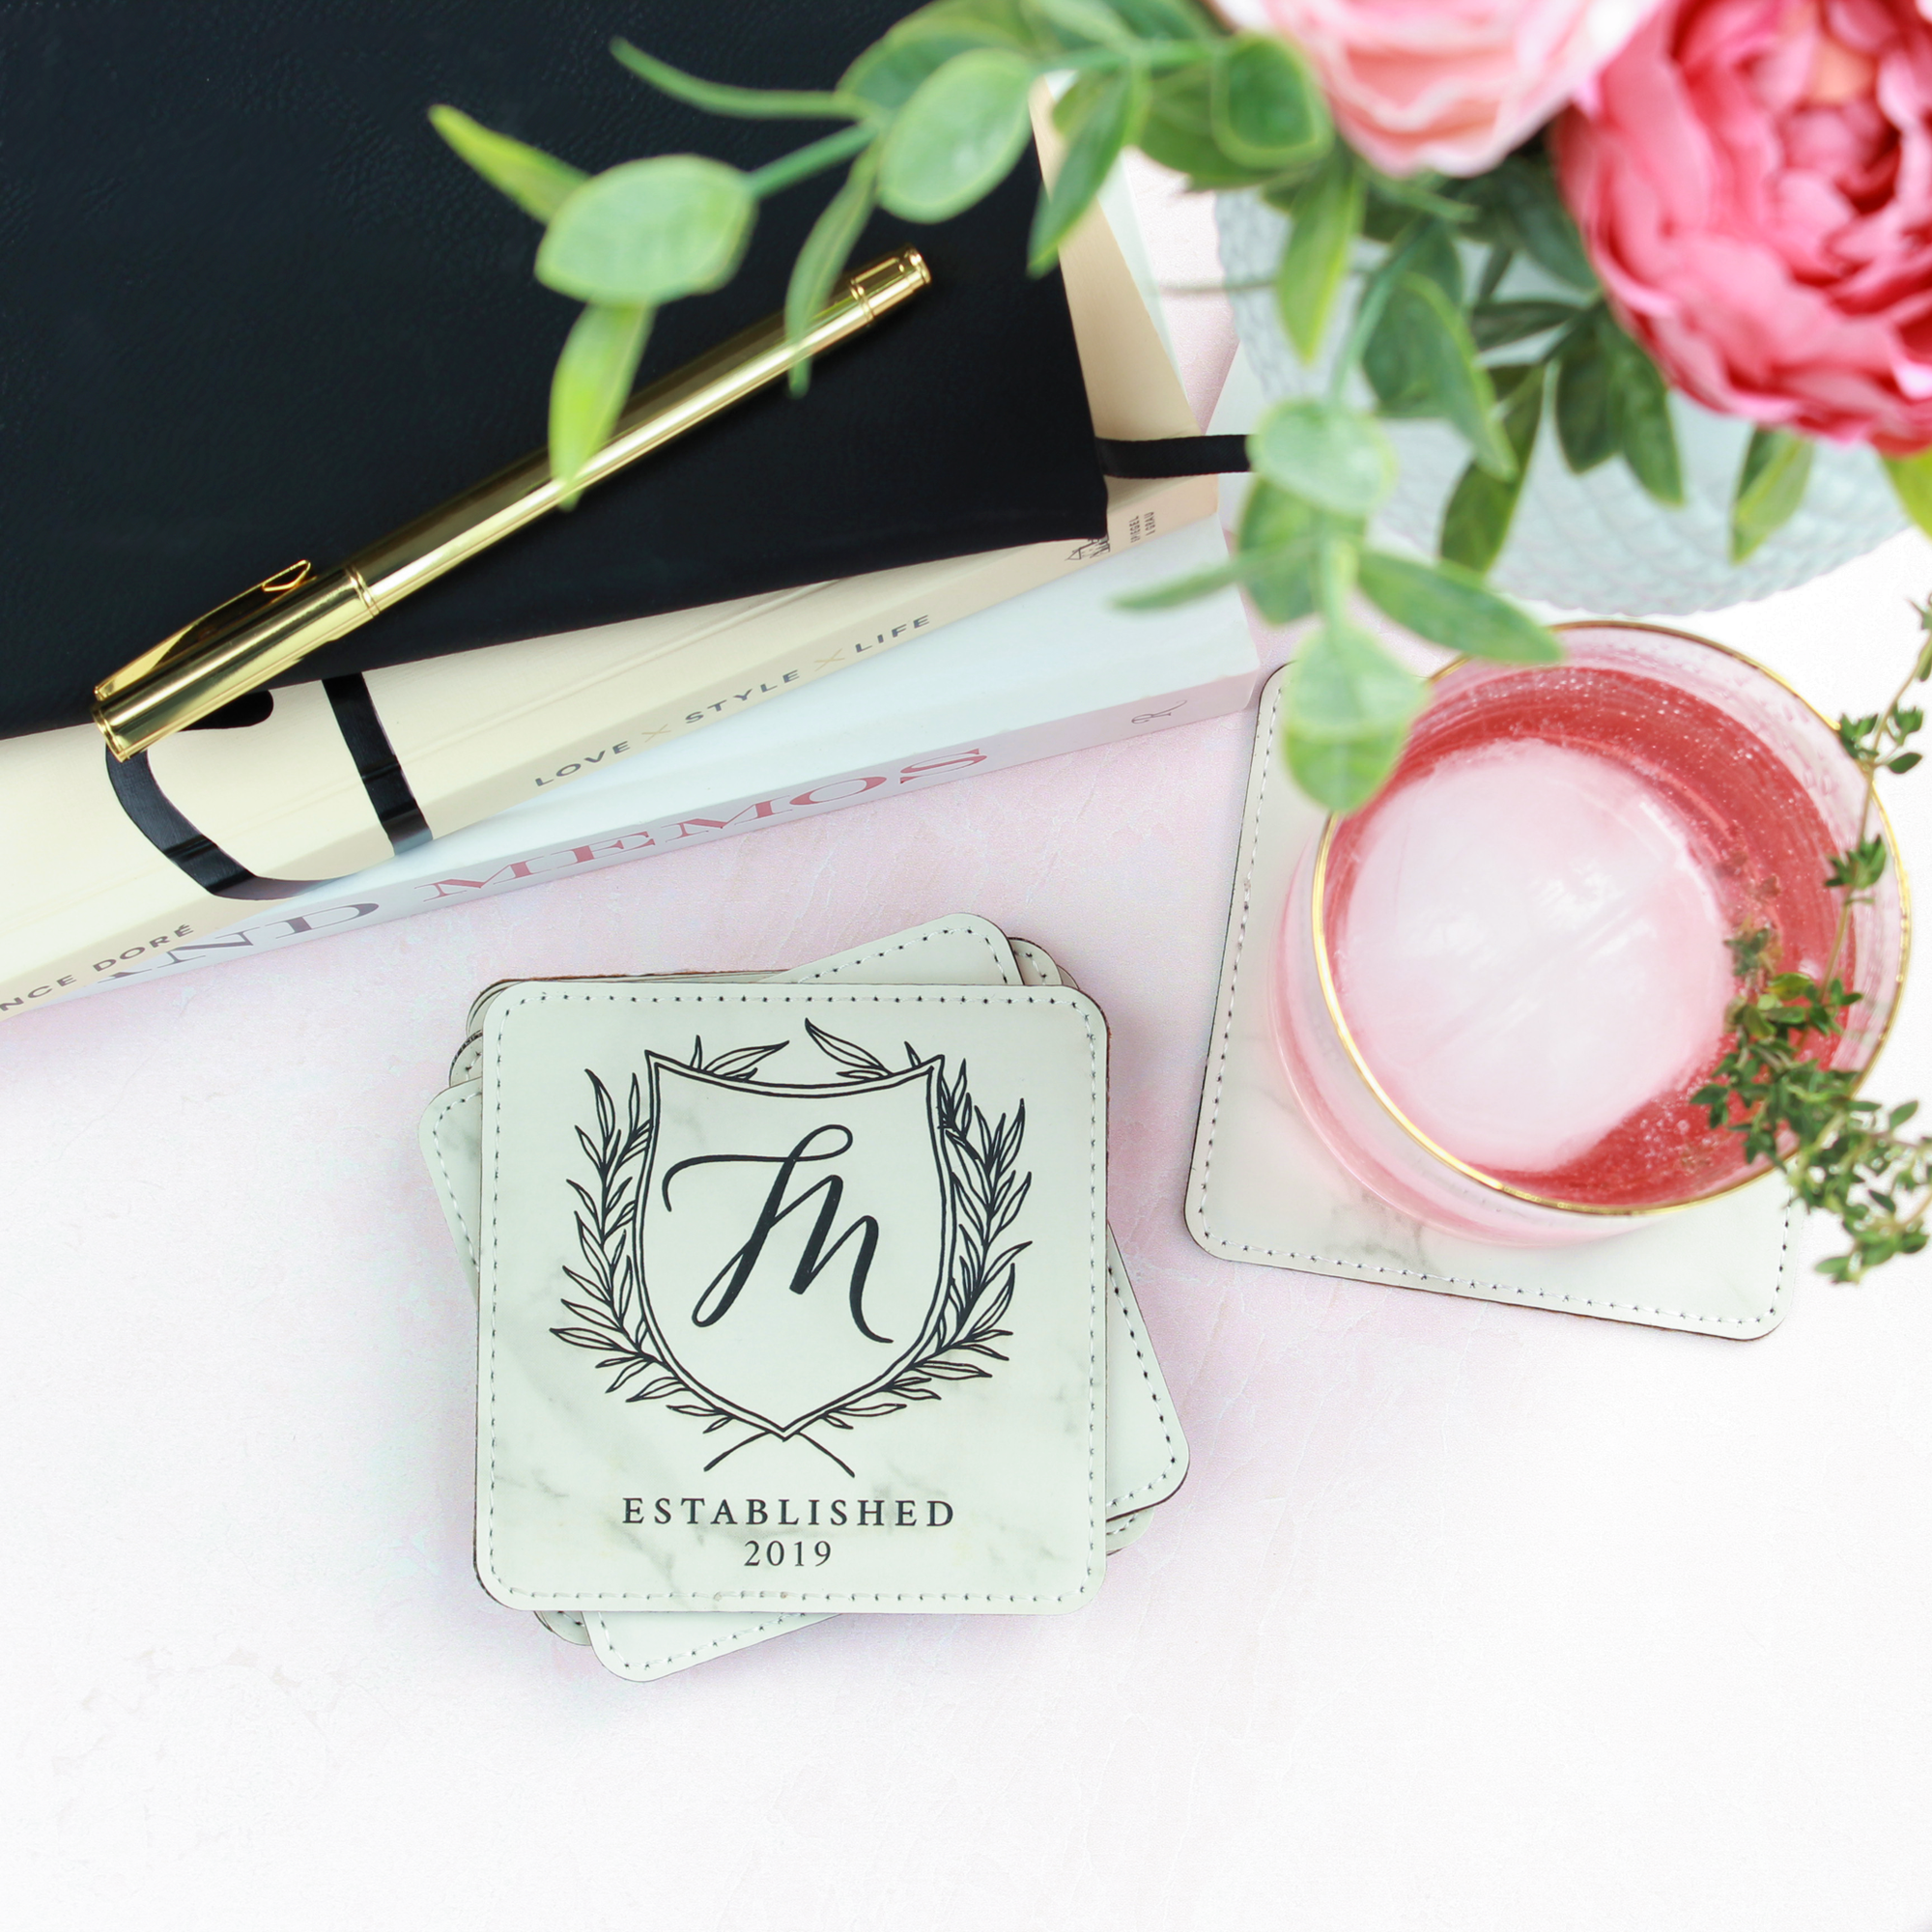 Personalized Leather Coasters - Square, Set of 4